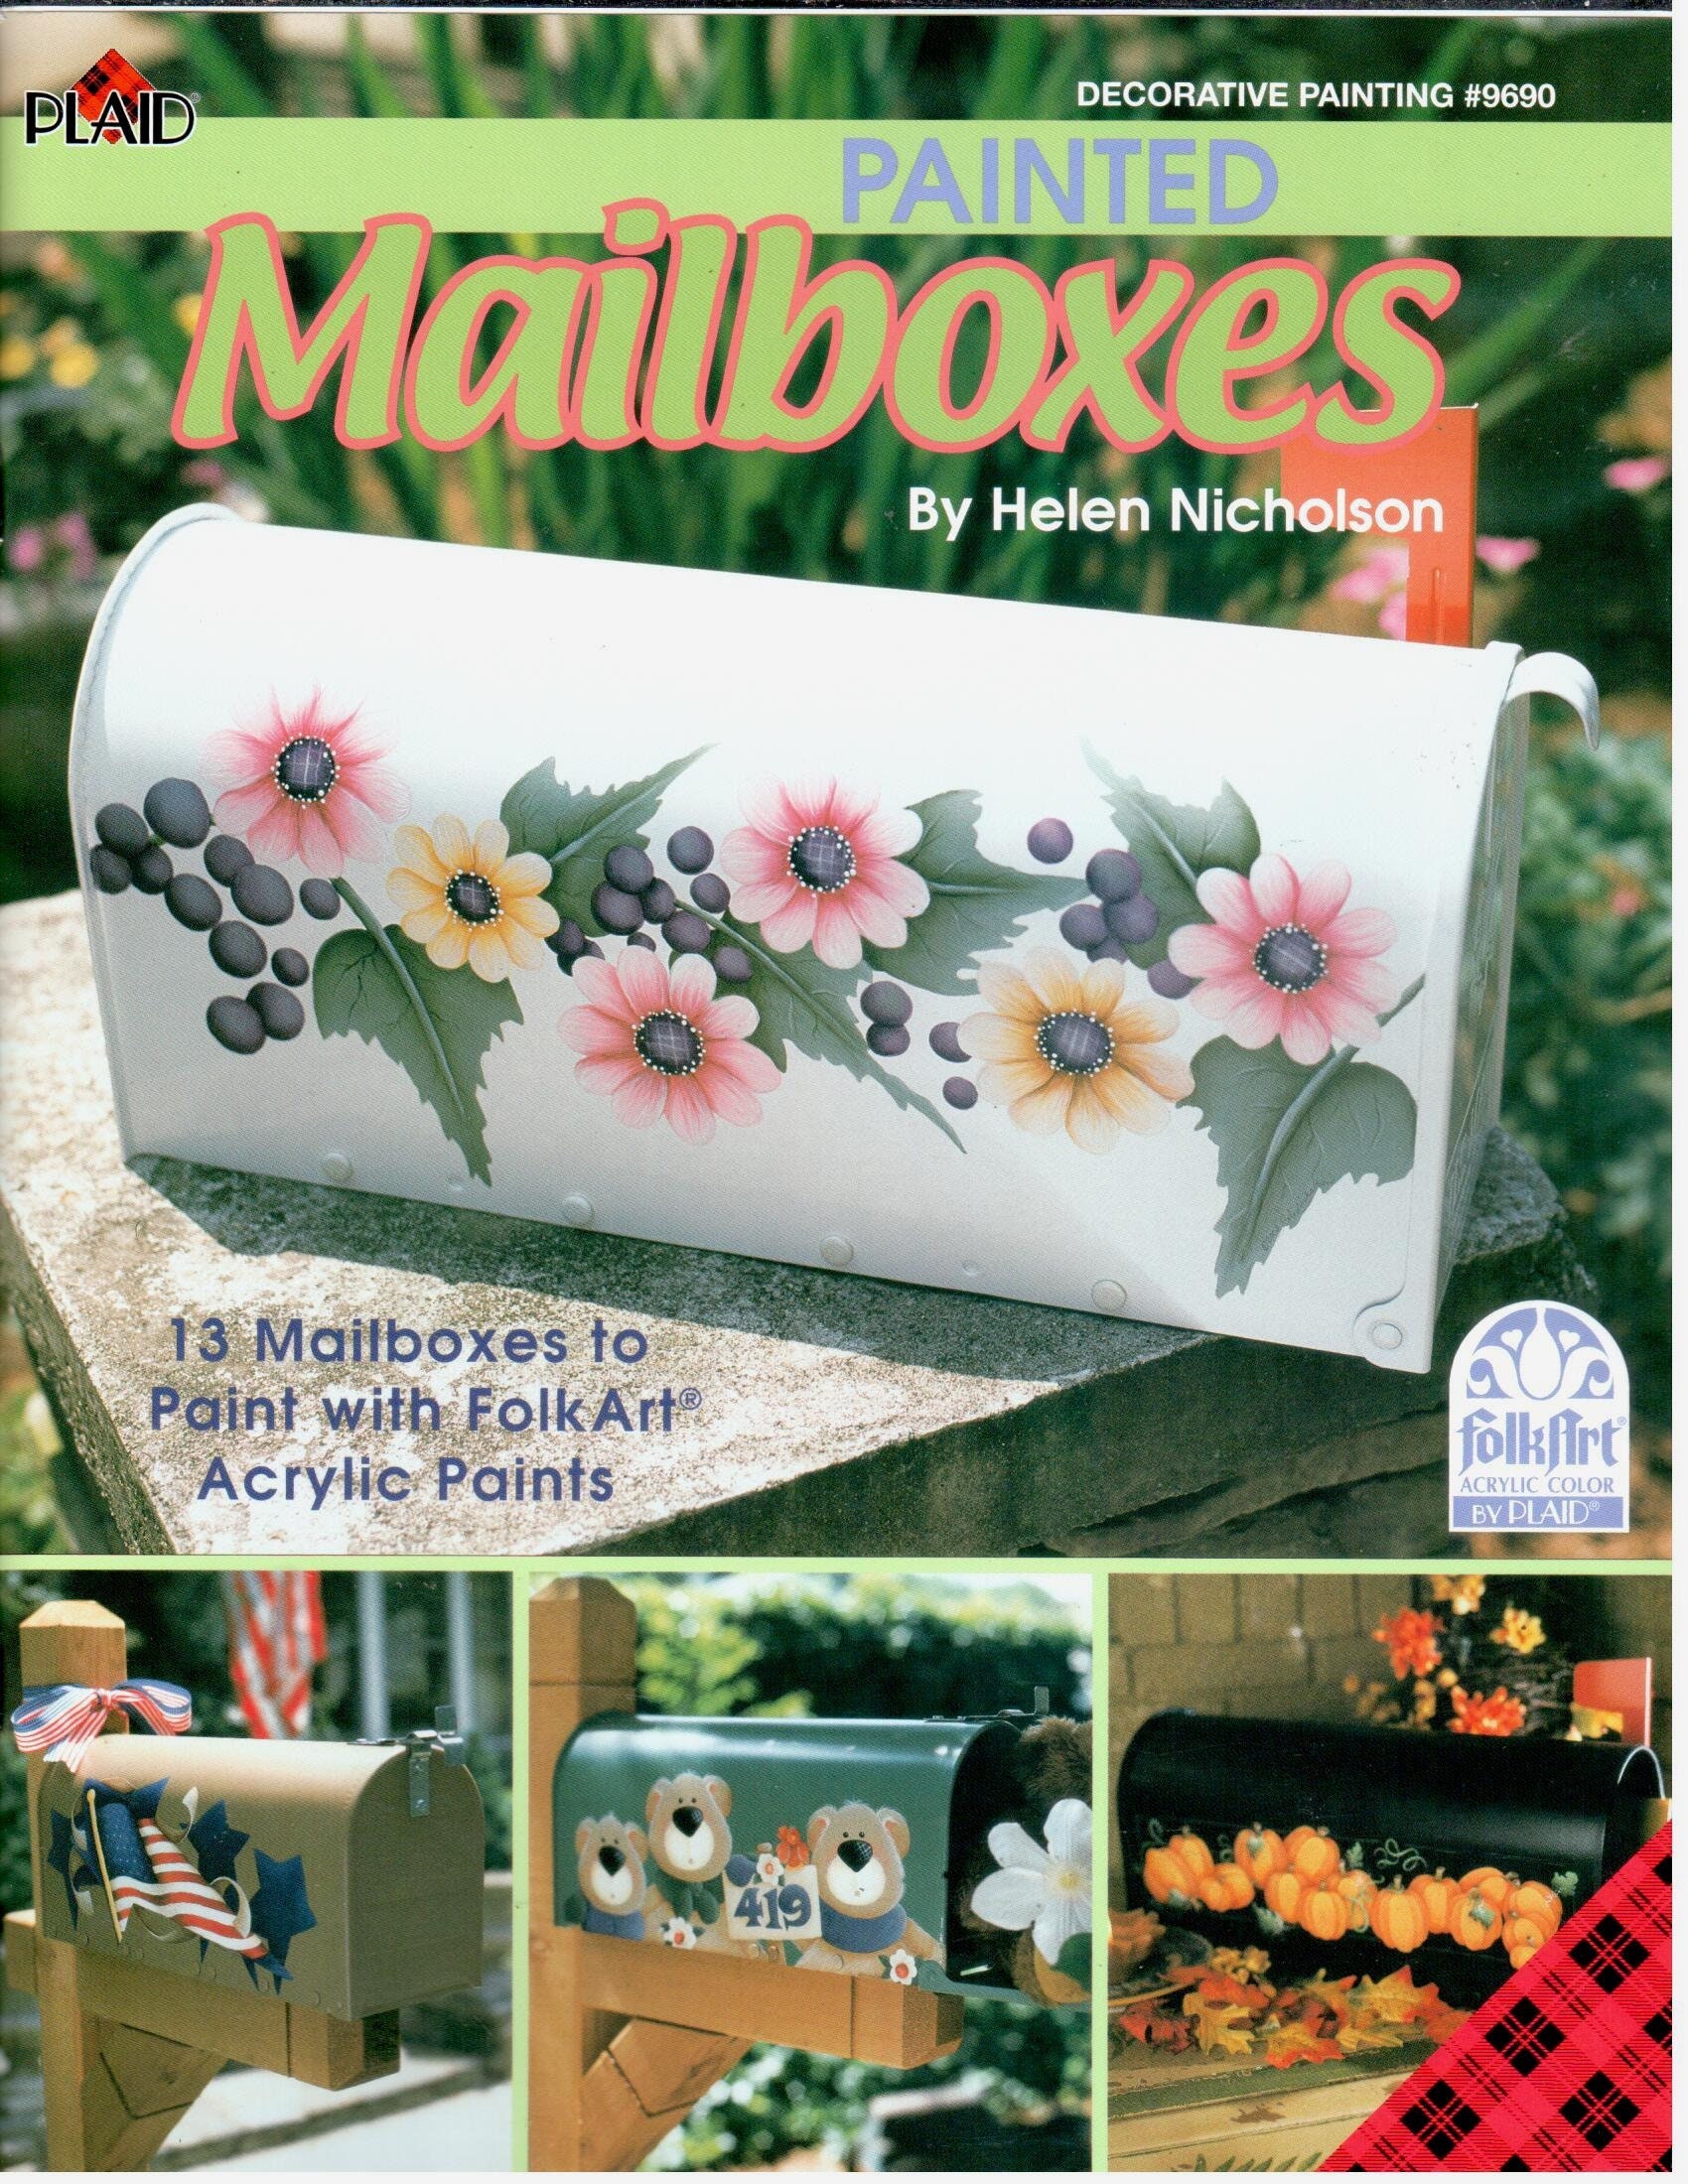 Painted Mailboxes Acrylic Decorative Painting Craft Book Helen